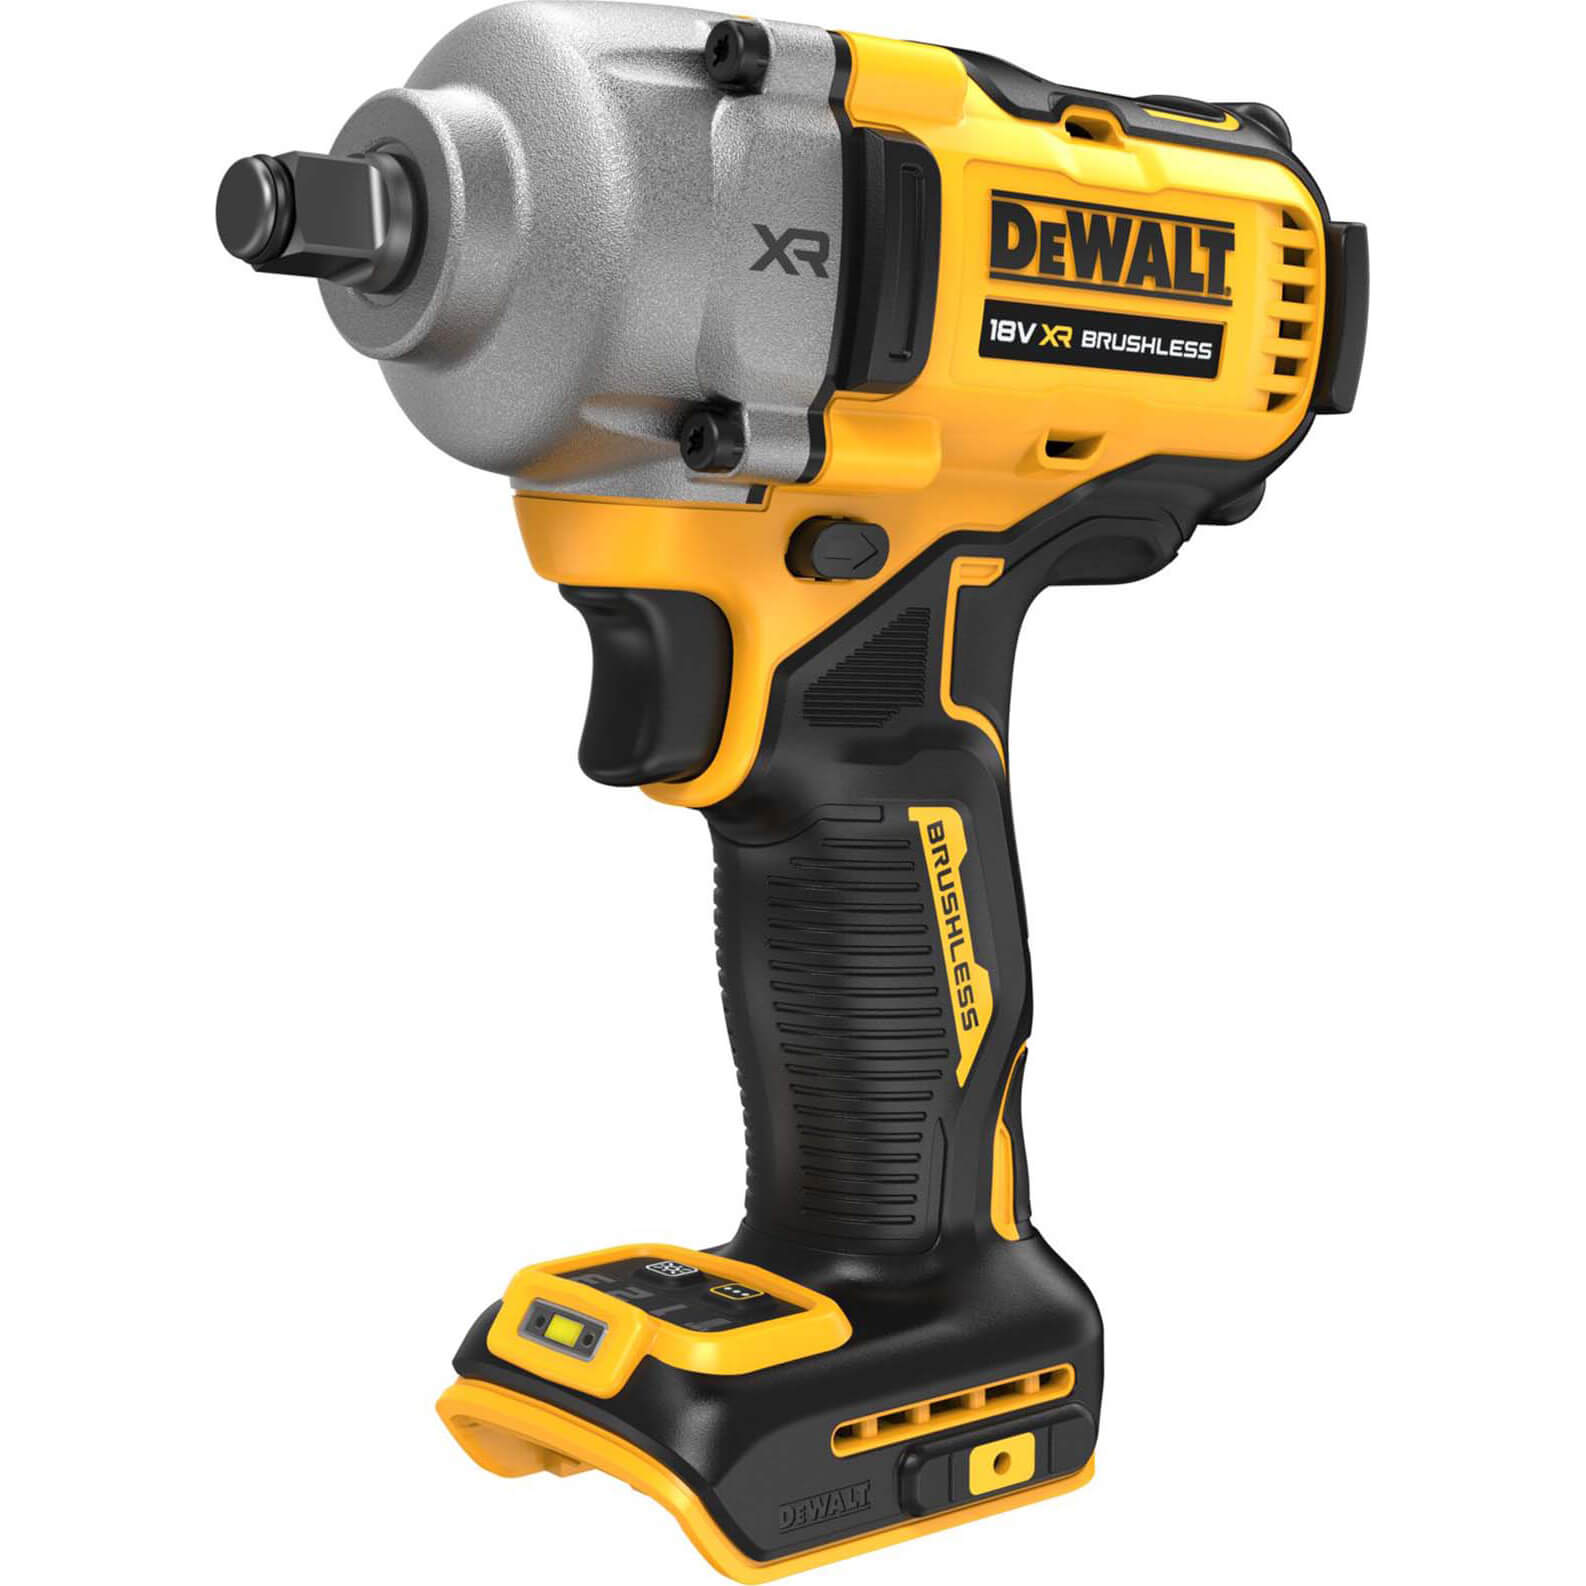 DeWalt DCF891 18v XR Cordless Brushless 1/2" Compact High Torque Wrench No Batteries No Charger No Case